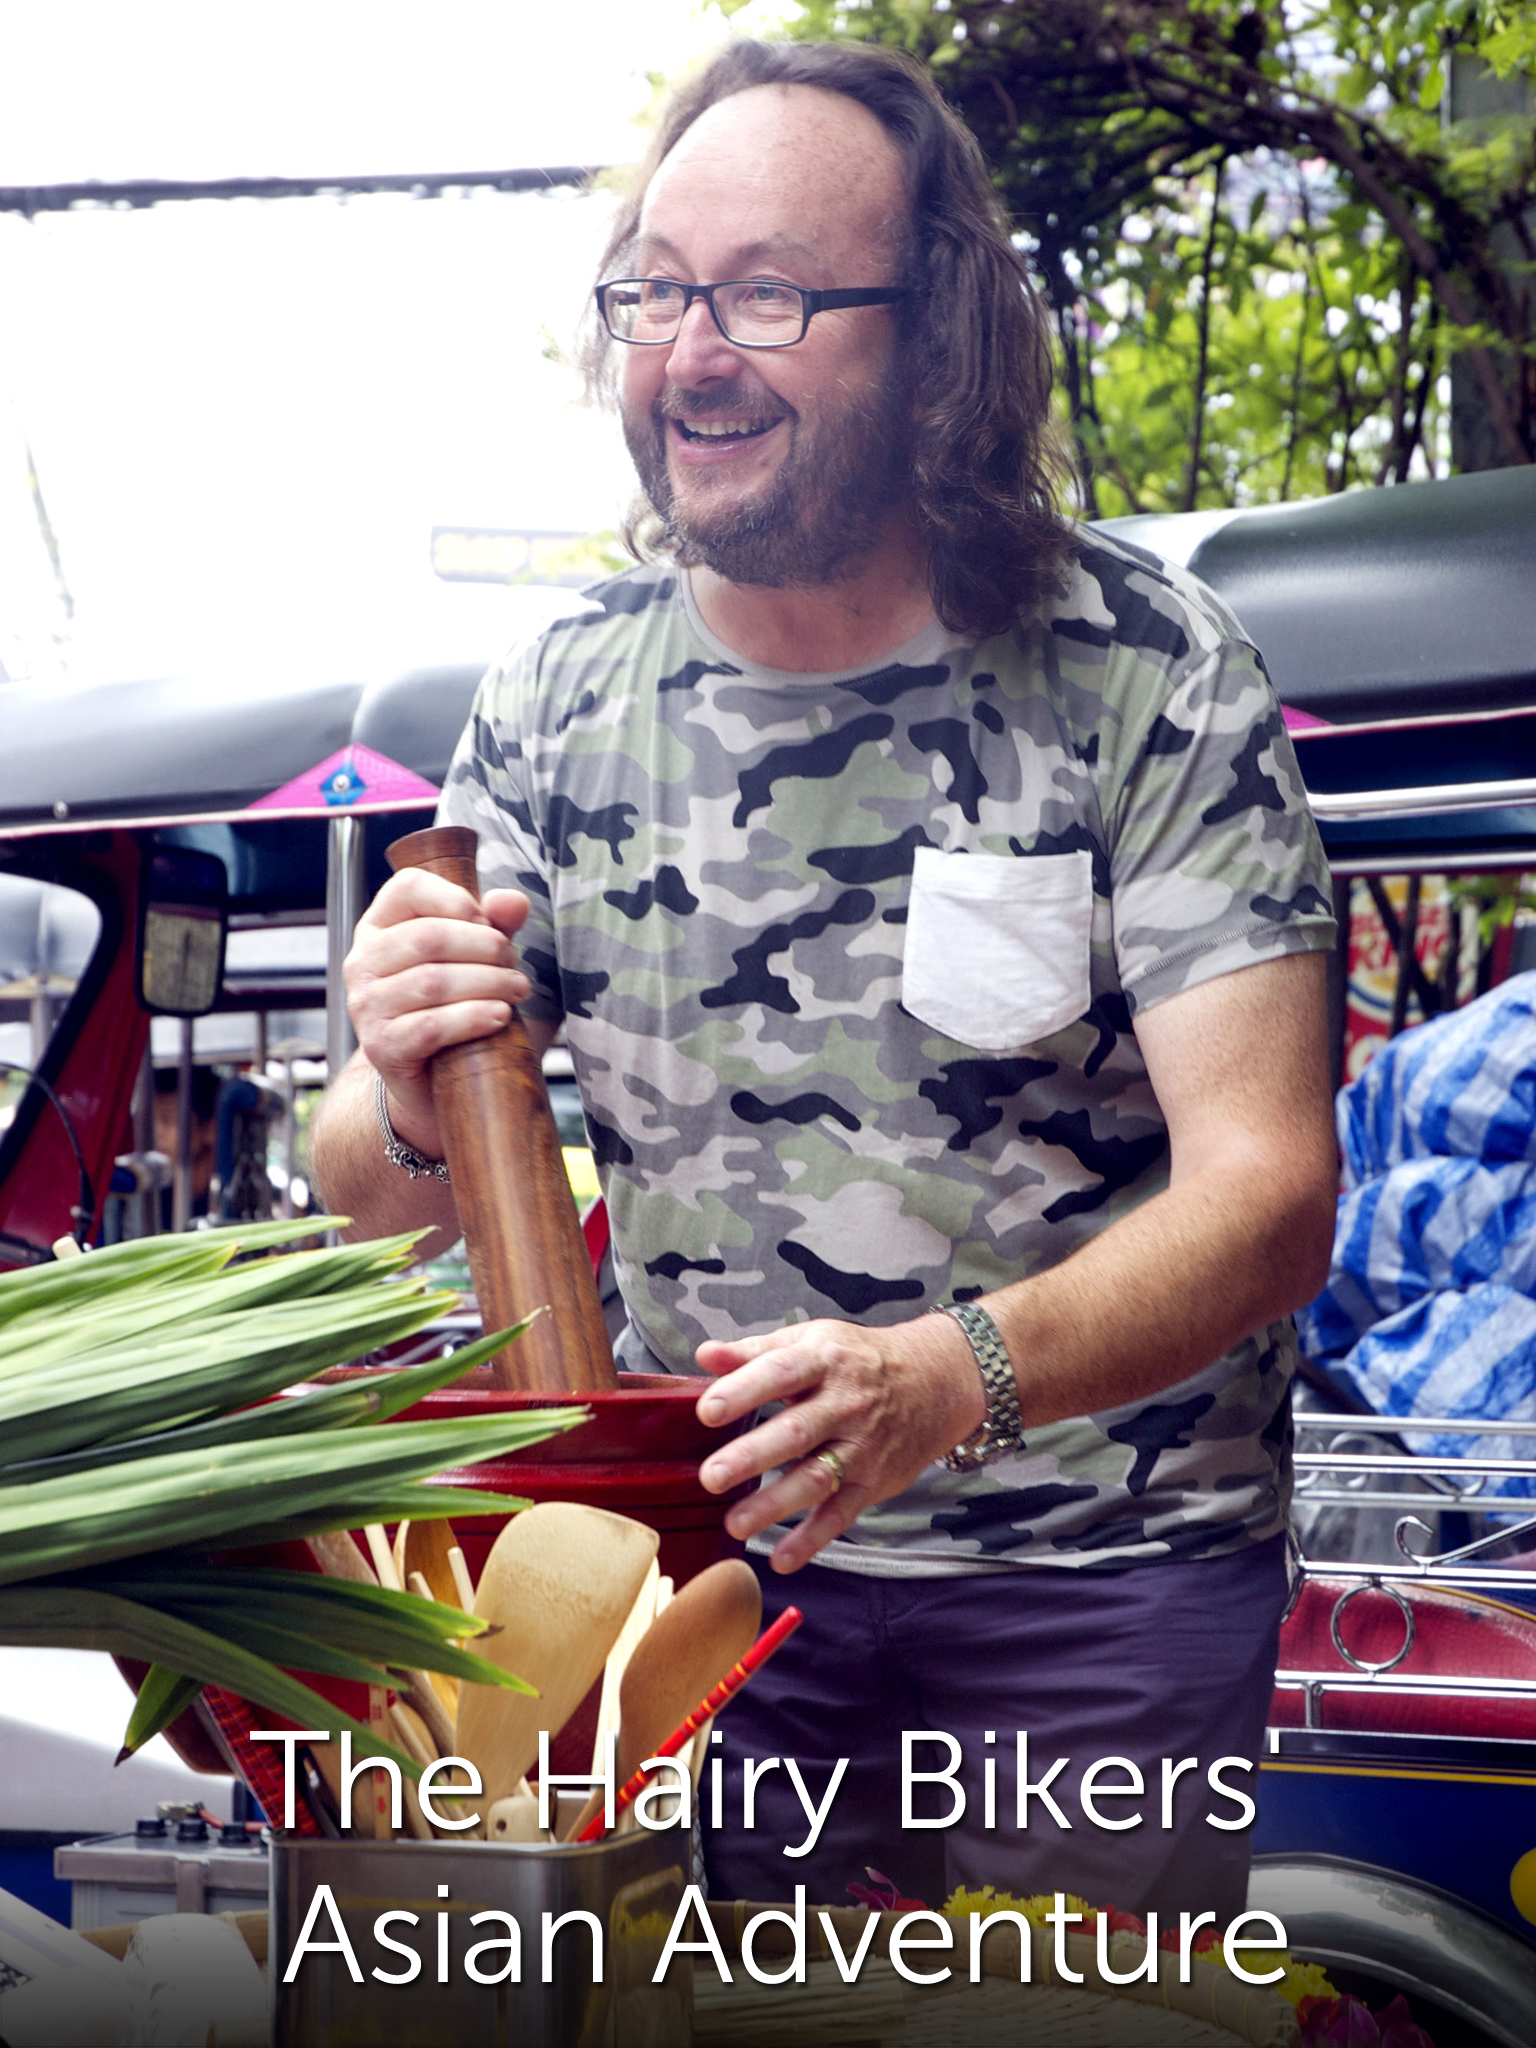 The Hairy Bikers' Asian Adventure - Where to Watch and Stream - TV Guide